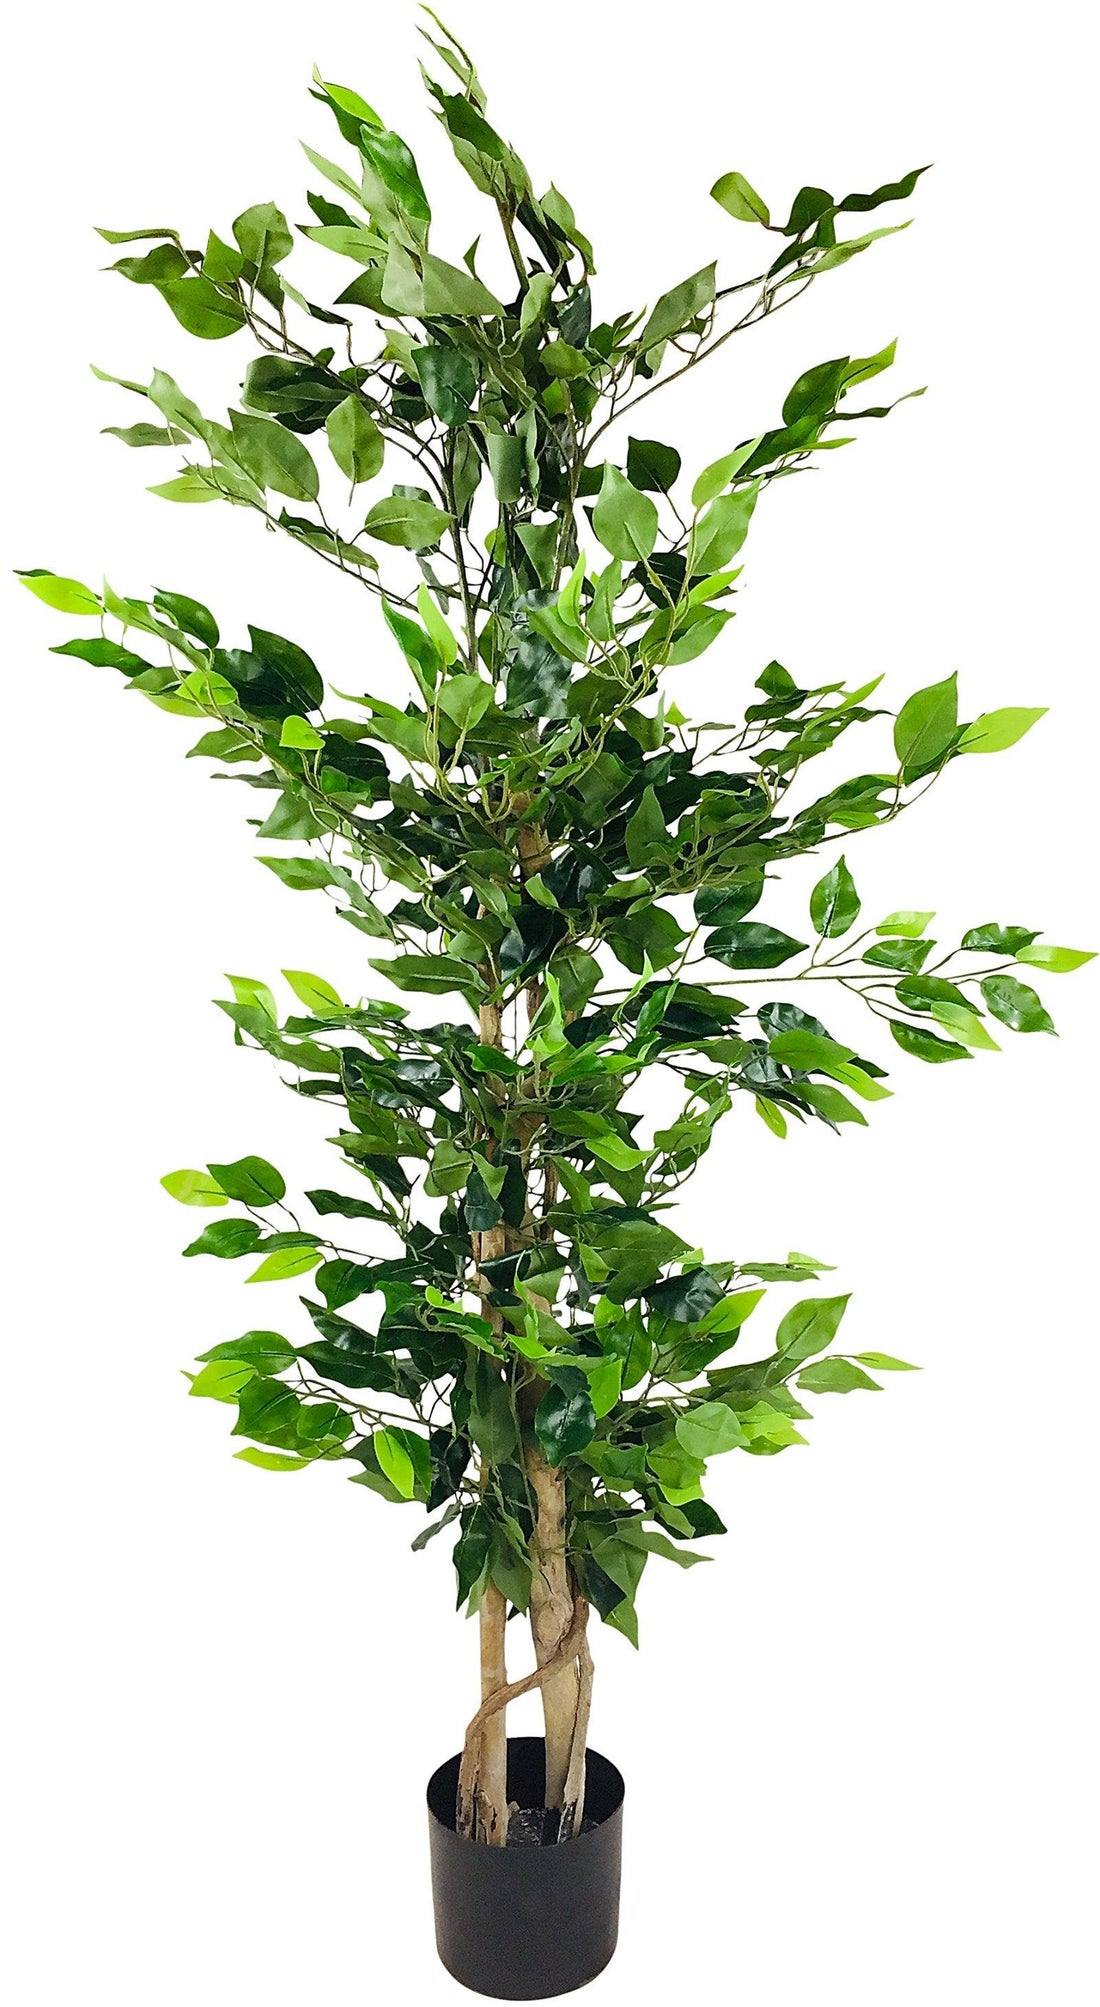 Artificial Ficus Tree with Natural Trunk 125cm - £96.99 - Artificial Plants 